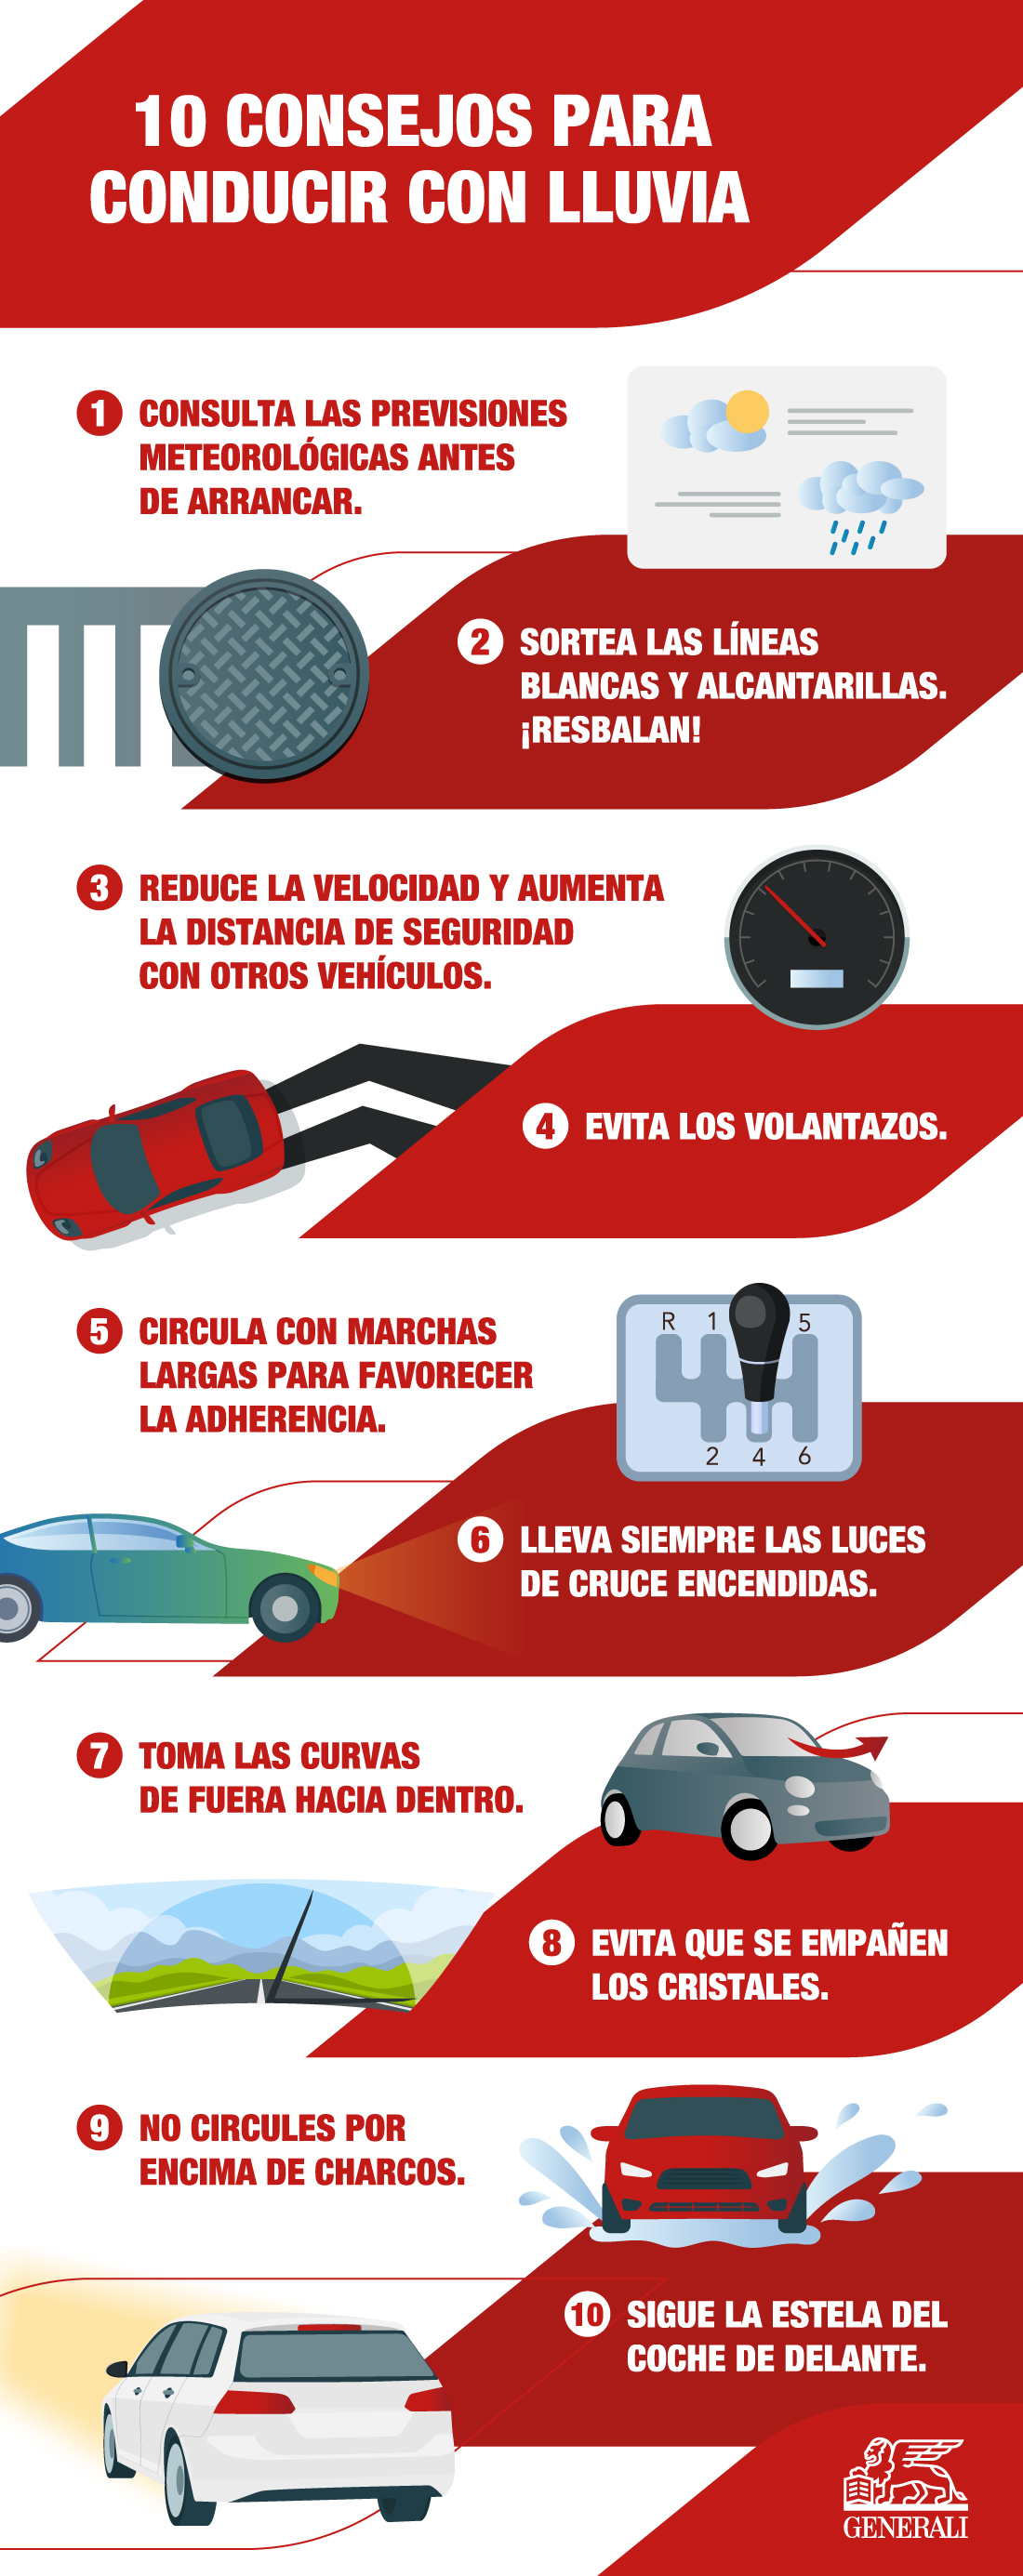 Generali-Spain-Infographic-How-to-drive-safely-in-wet-weather